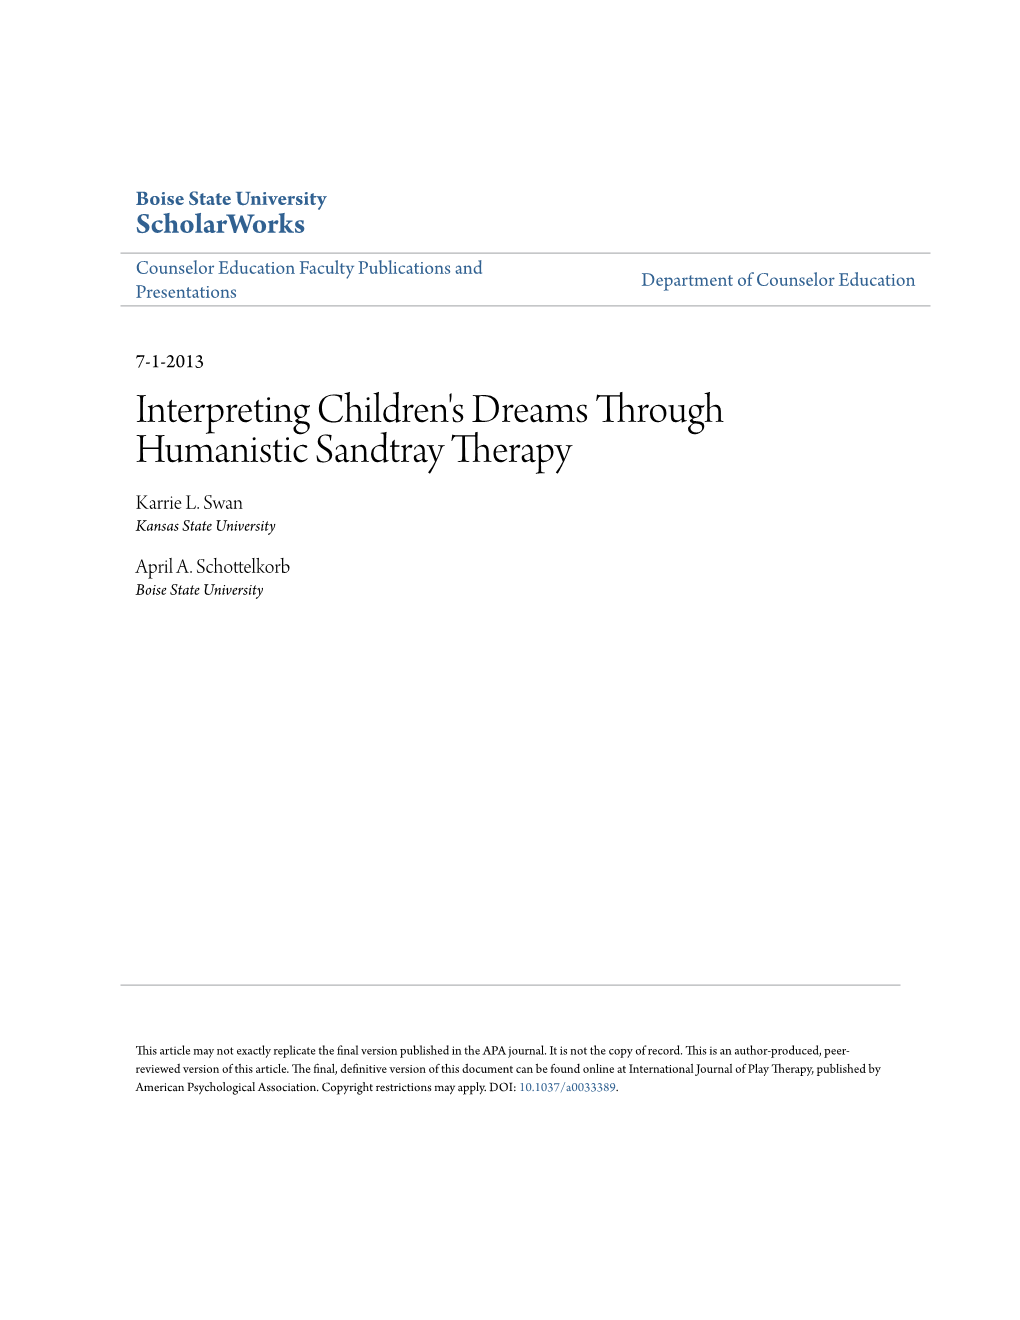 Interpreting Children's Dreams Through Humanistic Sandtray Therapy Karrie L